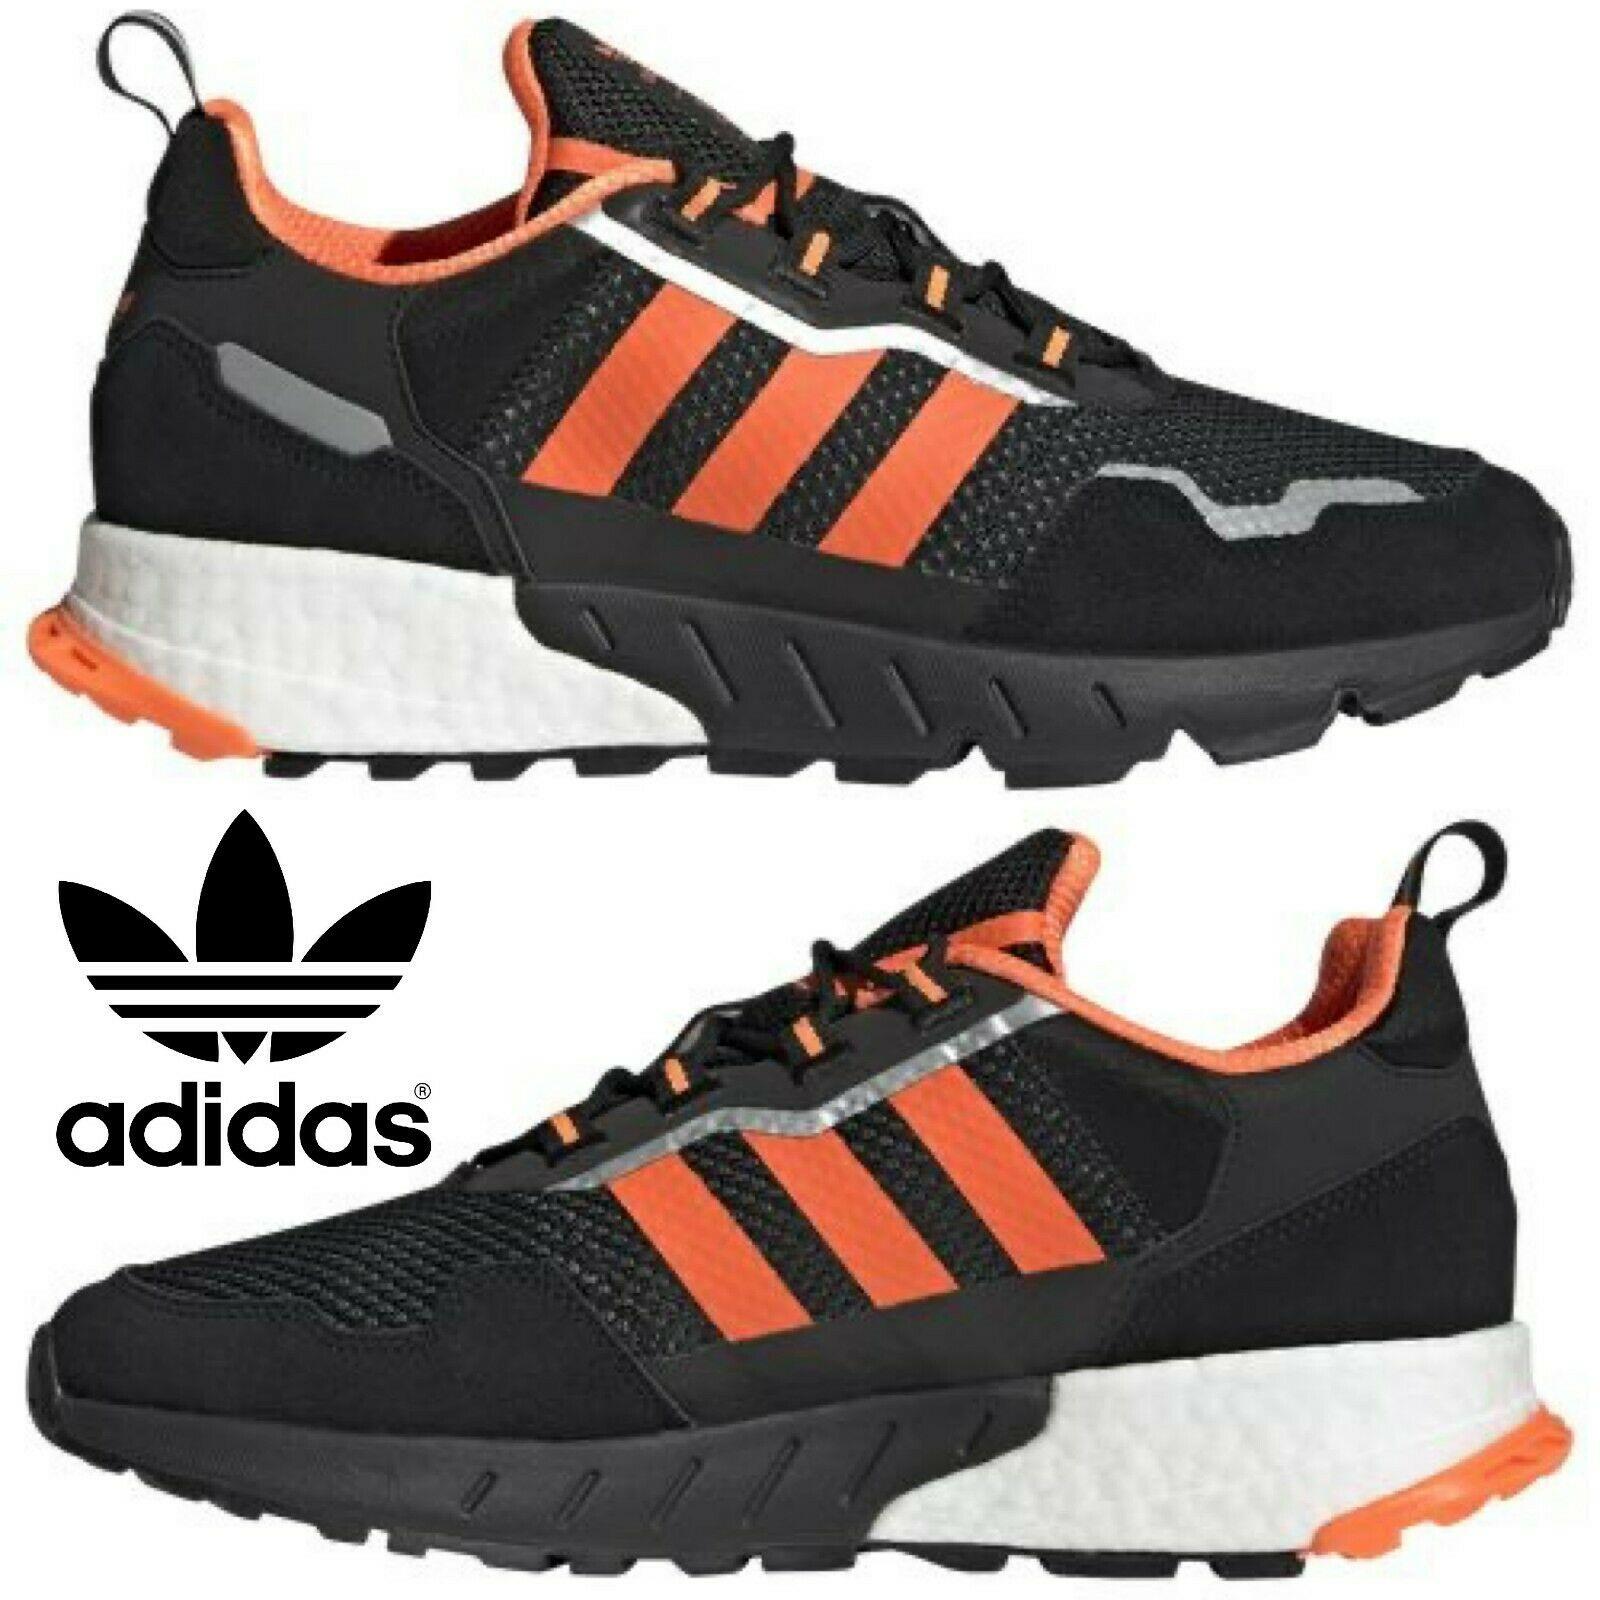 Adidas ZX 1K Boost Men`s Sneakers Running Shoes Gym Casual Sport Black Orange